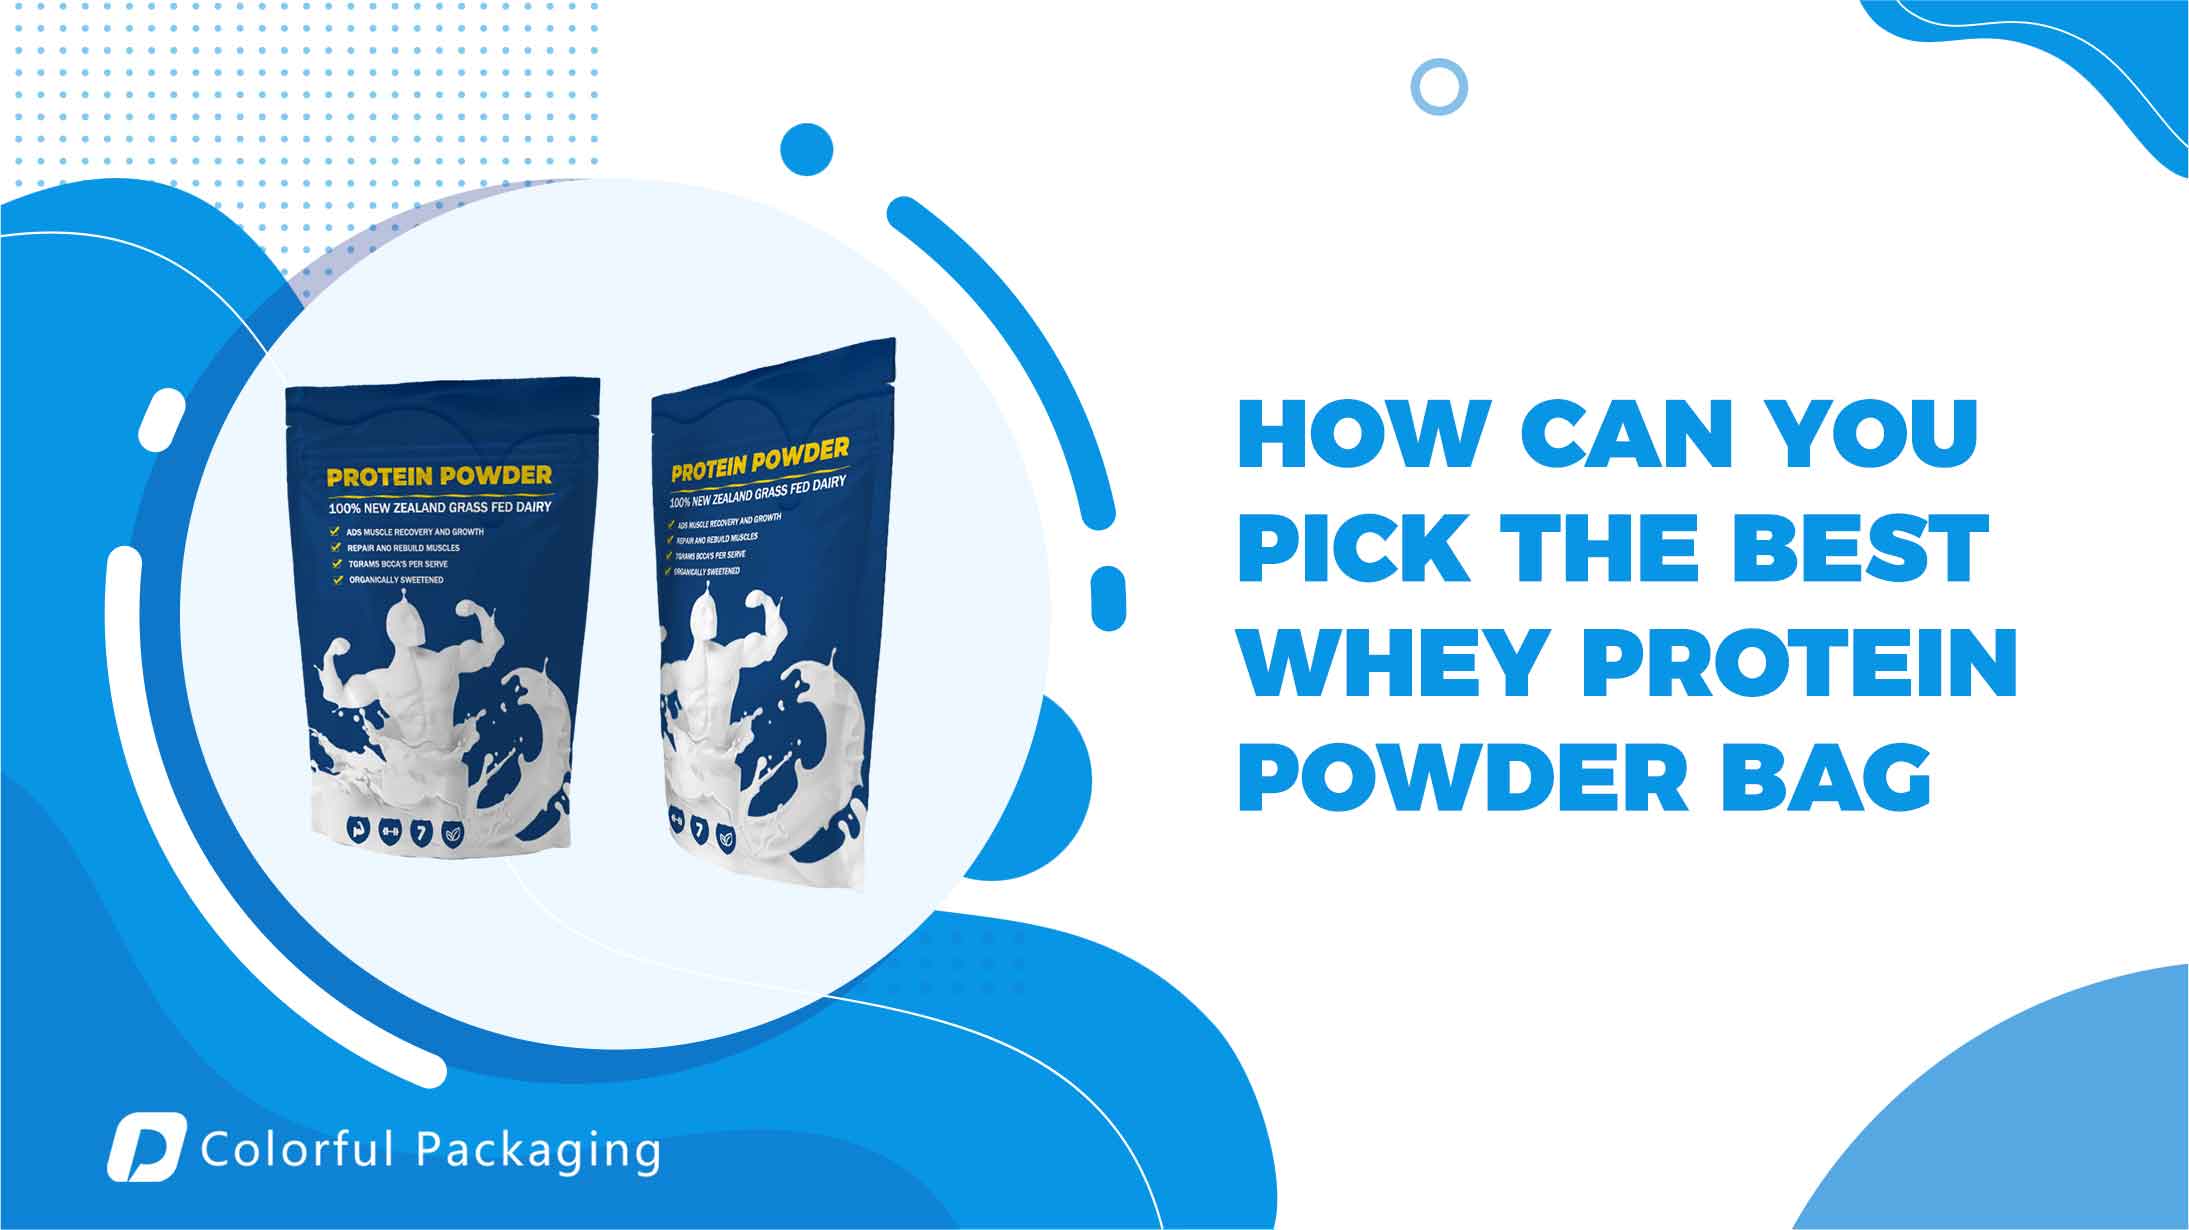 How can you pick the best whey protein powder bag?